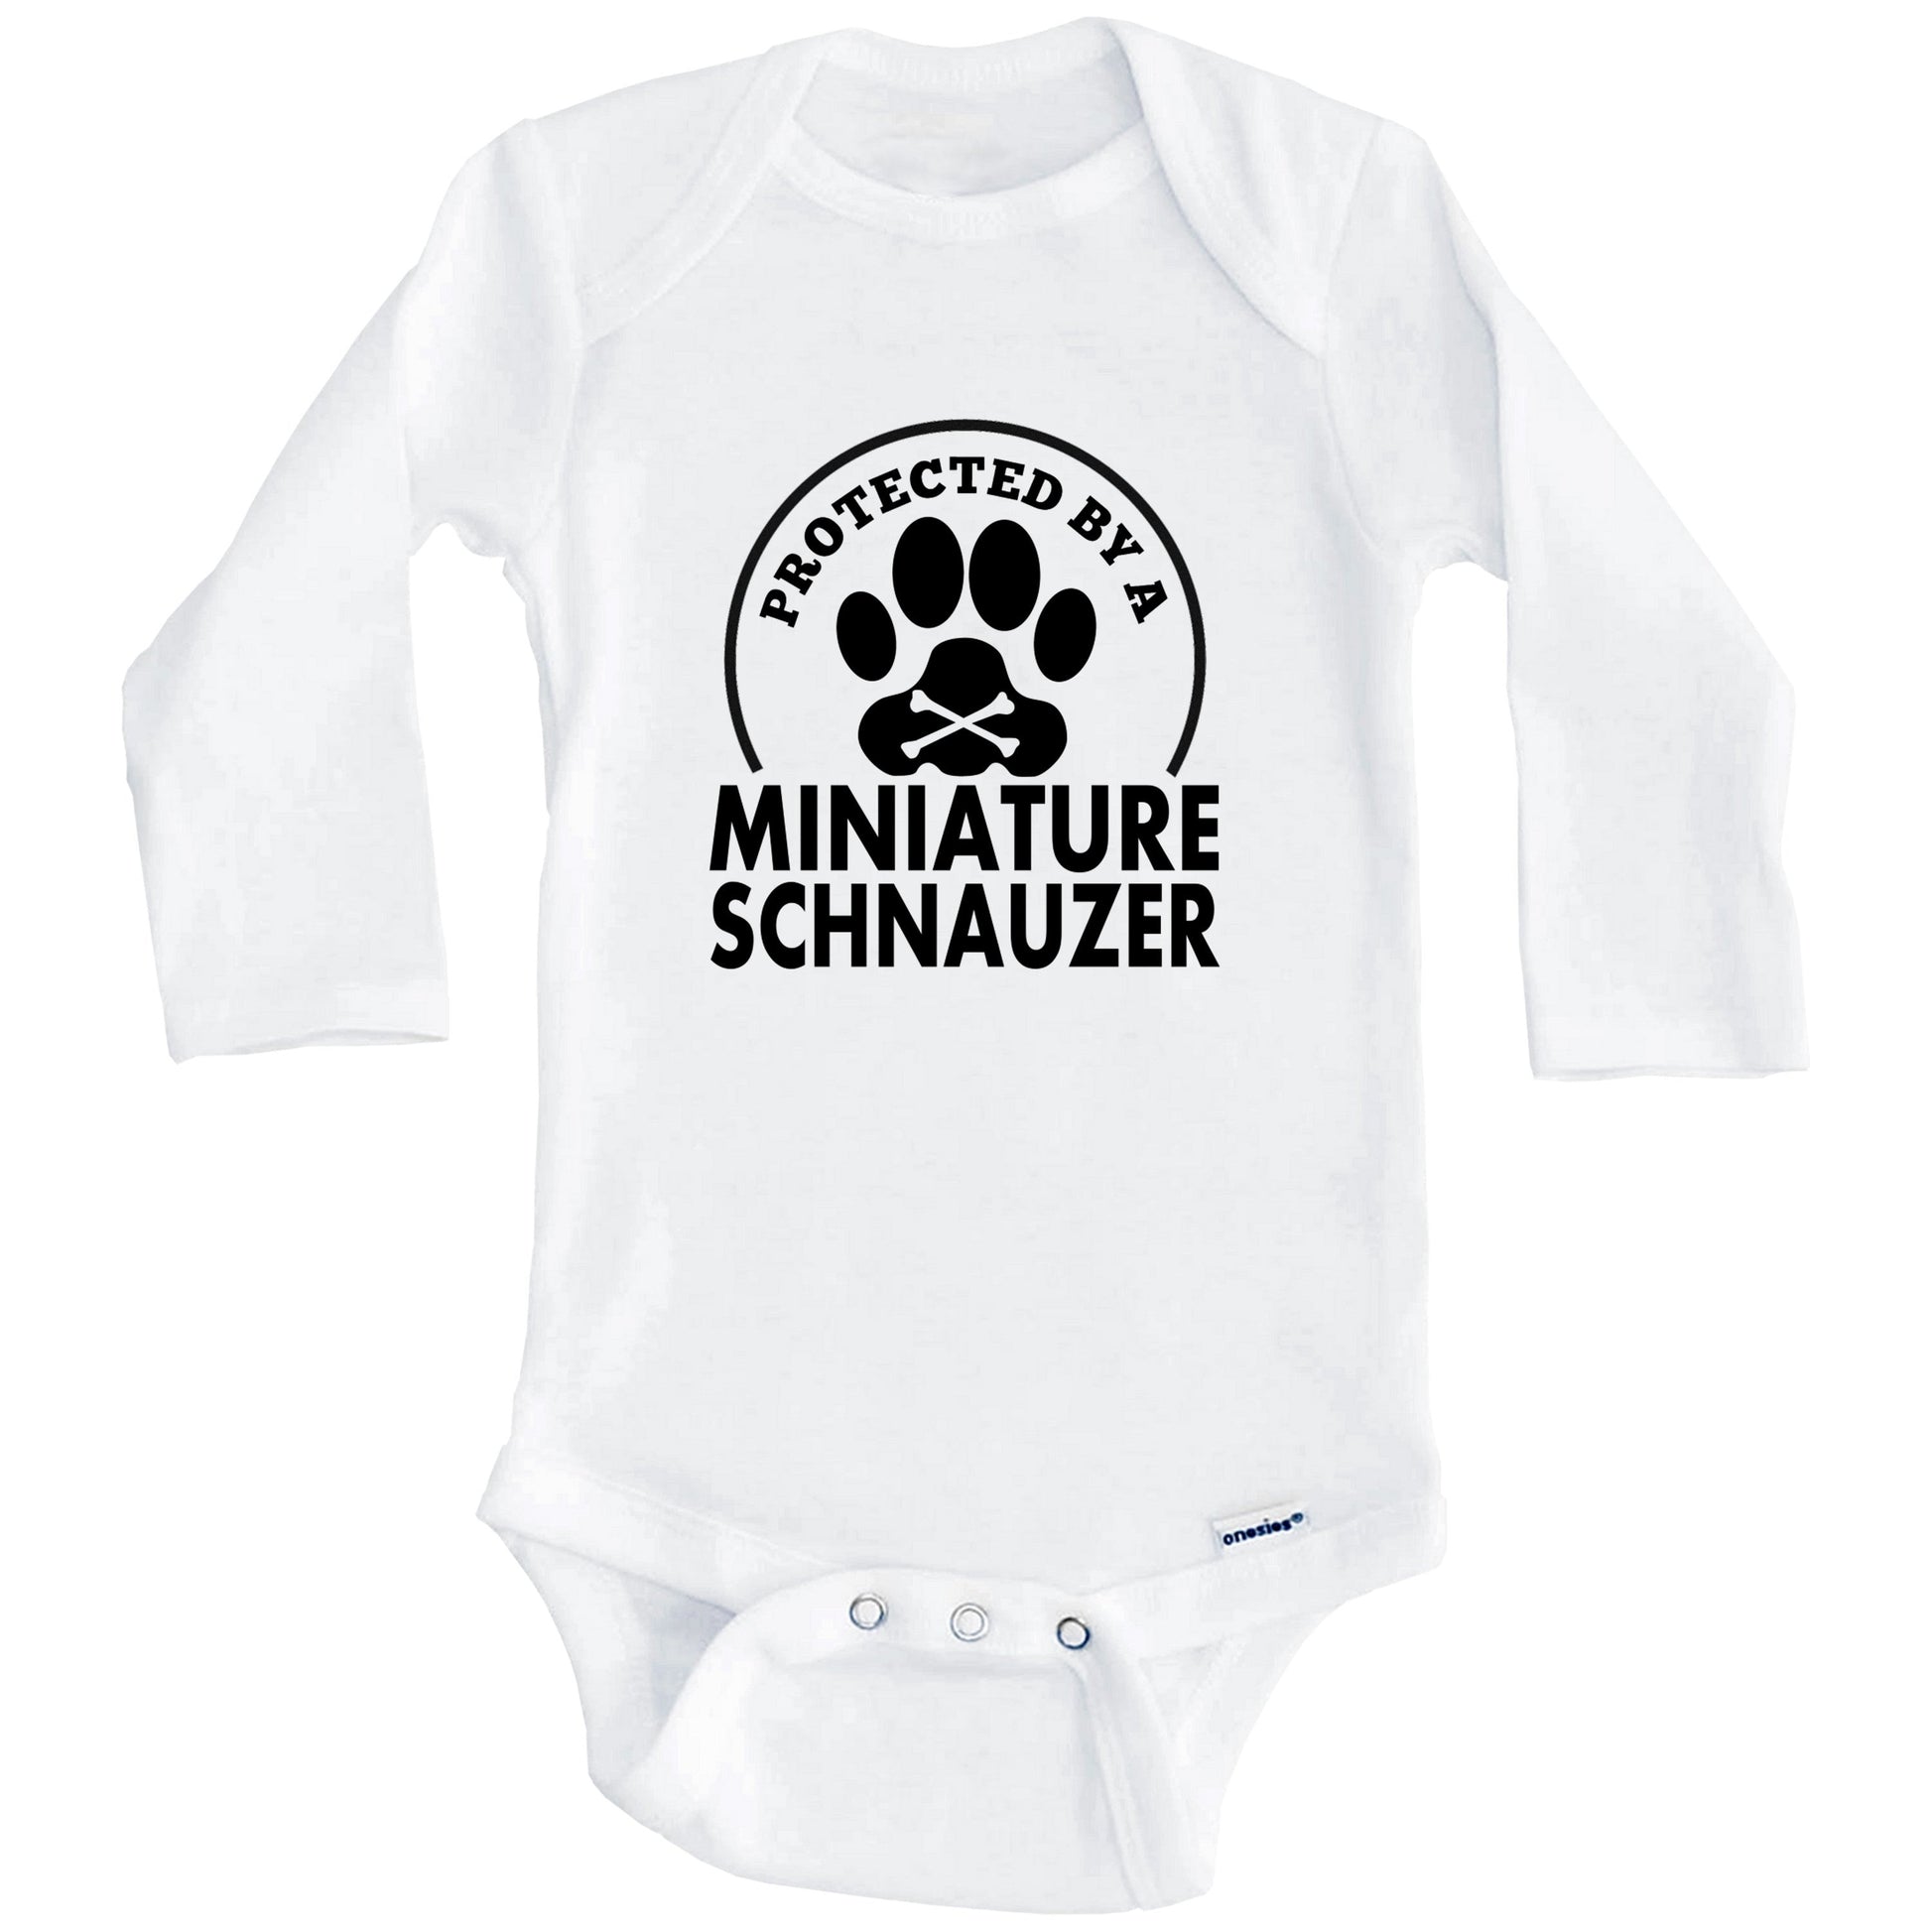 Protected By A Miniature Schnauzer Funny Baby Onesie (Long Sleeves)